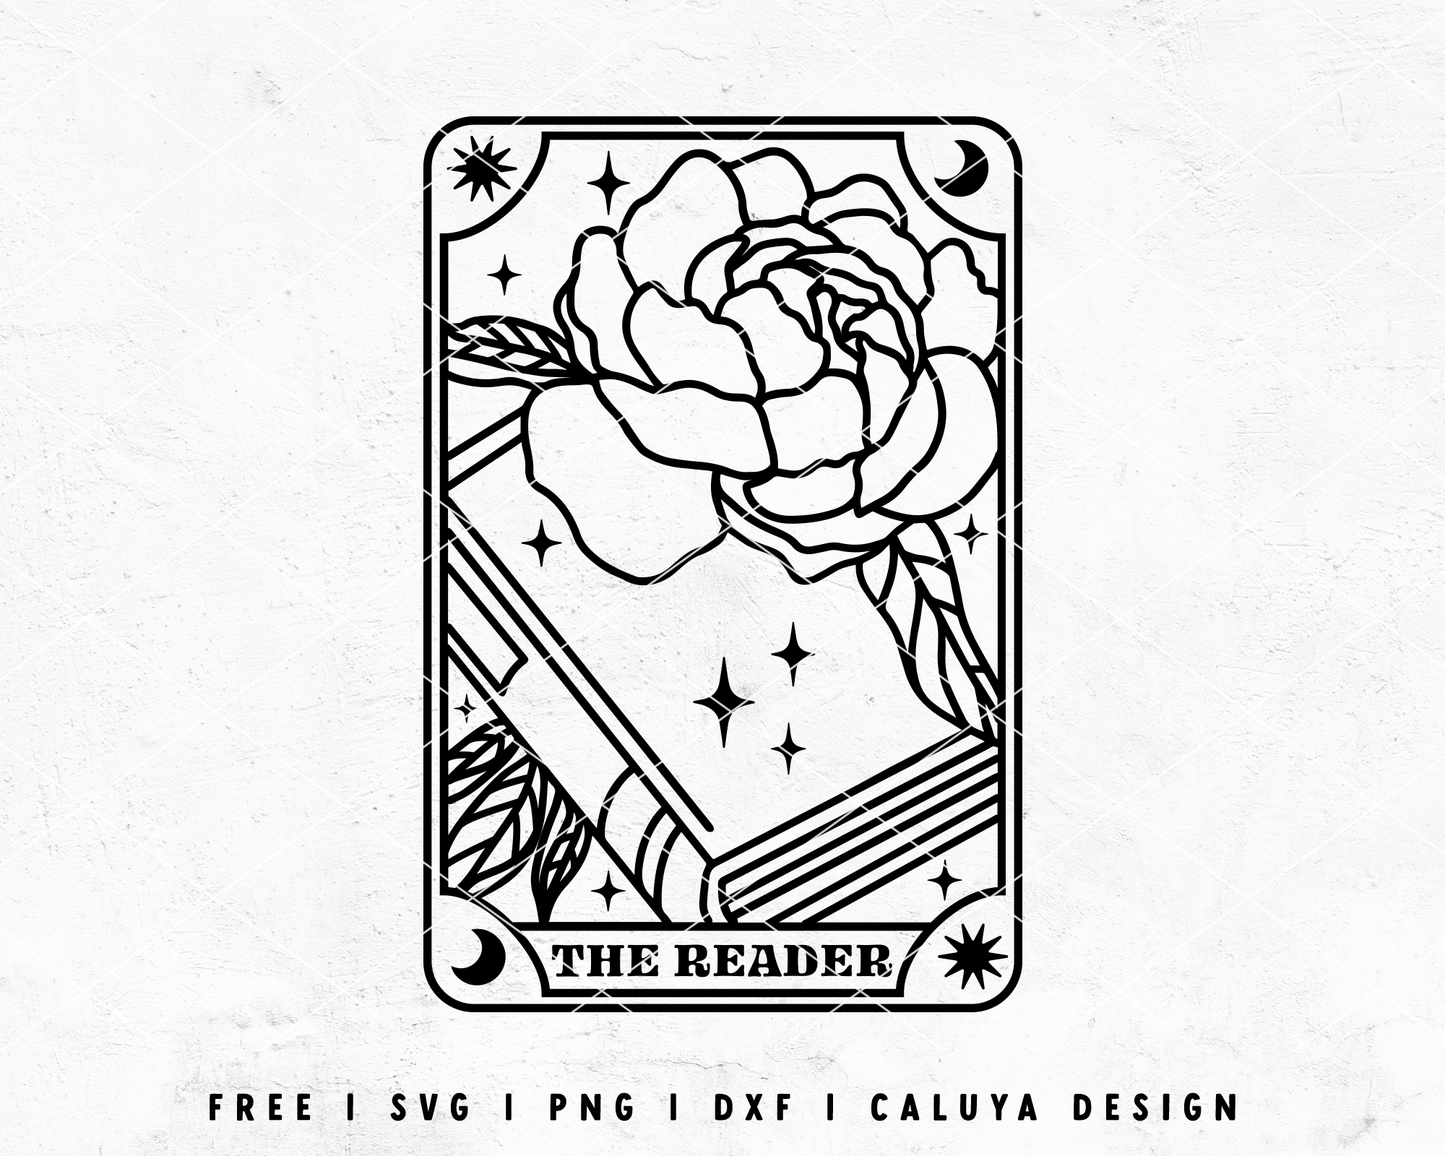 FREE Tarot Card SVG | The Book Reader SVG Cut File for Cricut, Cameo Silhouette | Free SVG Cut File